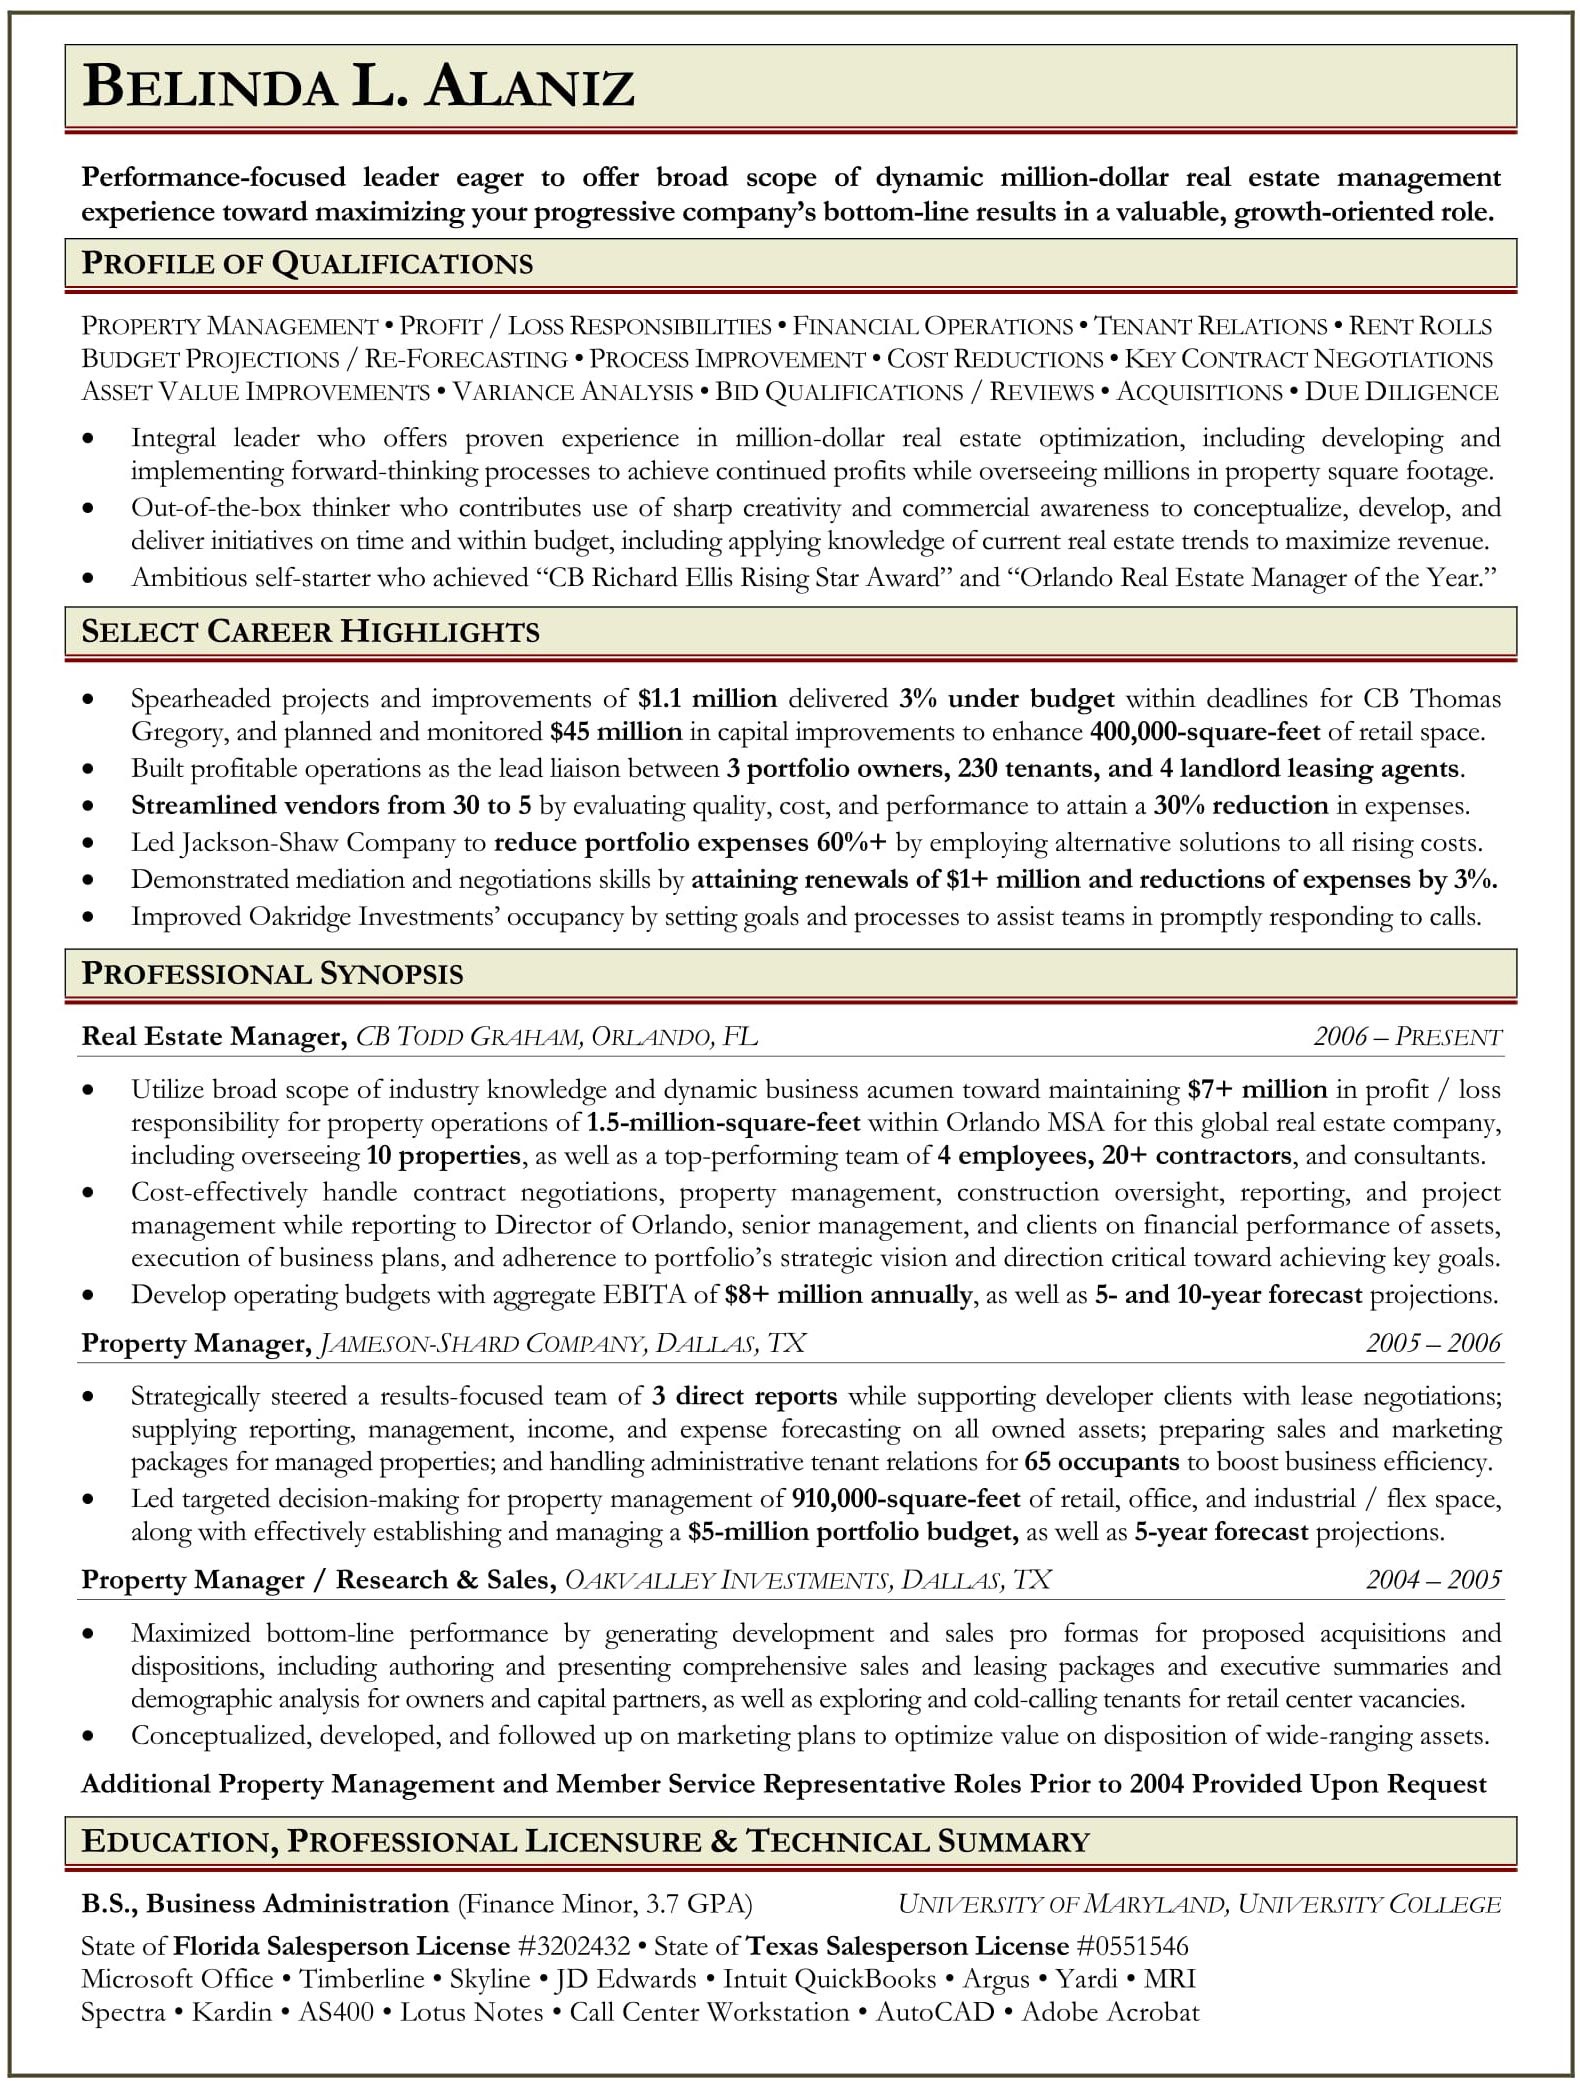 Sample Resume for Property Manager Ranked # 1